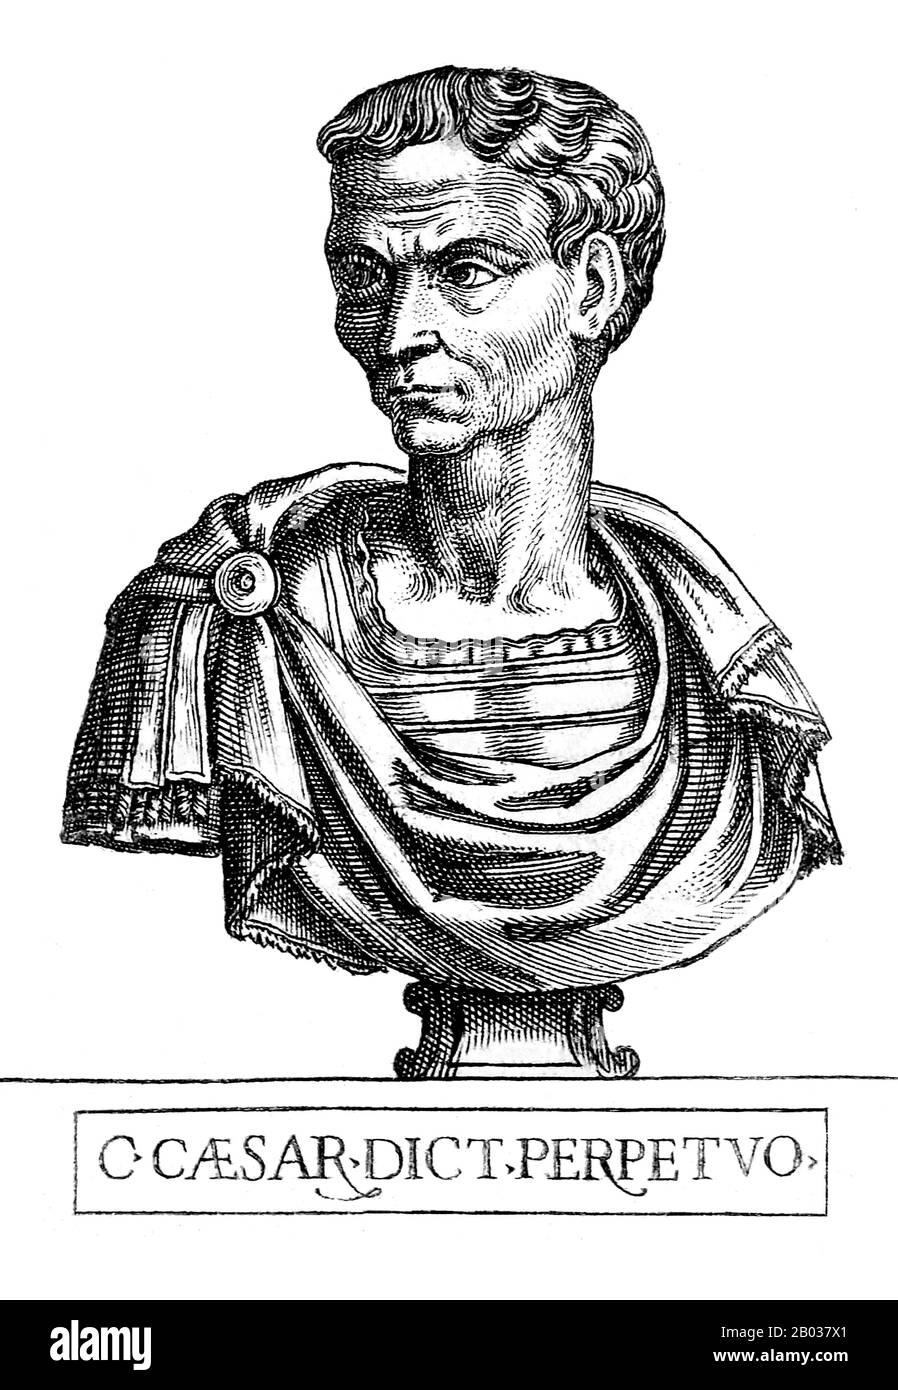 Born Gaius Julius Caesar (100-44 BCE), Julius Caesar was one the most infamous figures in history. A Roman politican, general and author, he played a critical role in the fall of the Roman Republic and paved the way for the rise of the Roman Empire. His political alliance alongside Crassus and Pompey, first formed in 60 BCE, would dominate Roman politics for many years. His victories in the Gallic Wars extended the Republic's territories all the way to the English Channel and the Rhine, and he became the first Roman general to build a bridge across the Rhine, as well as starting the invasion o Stock Photo